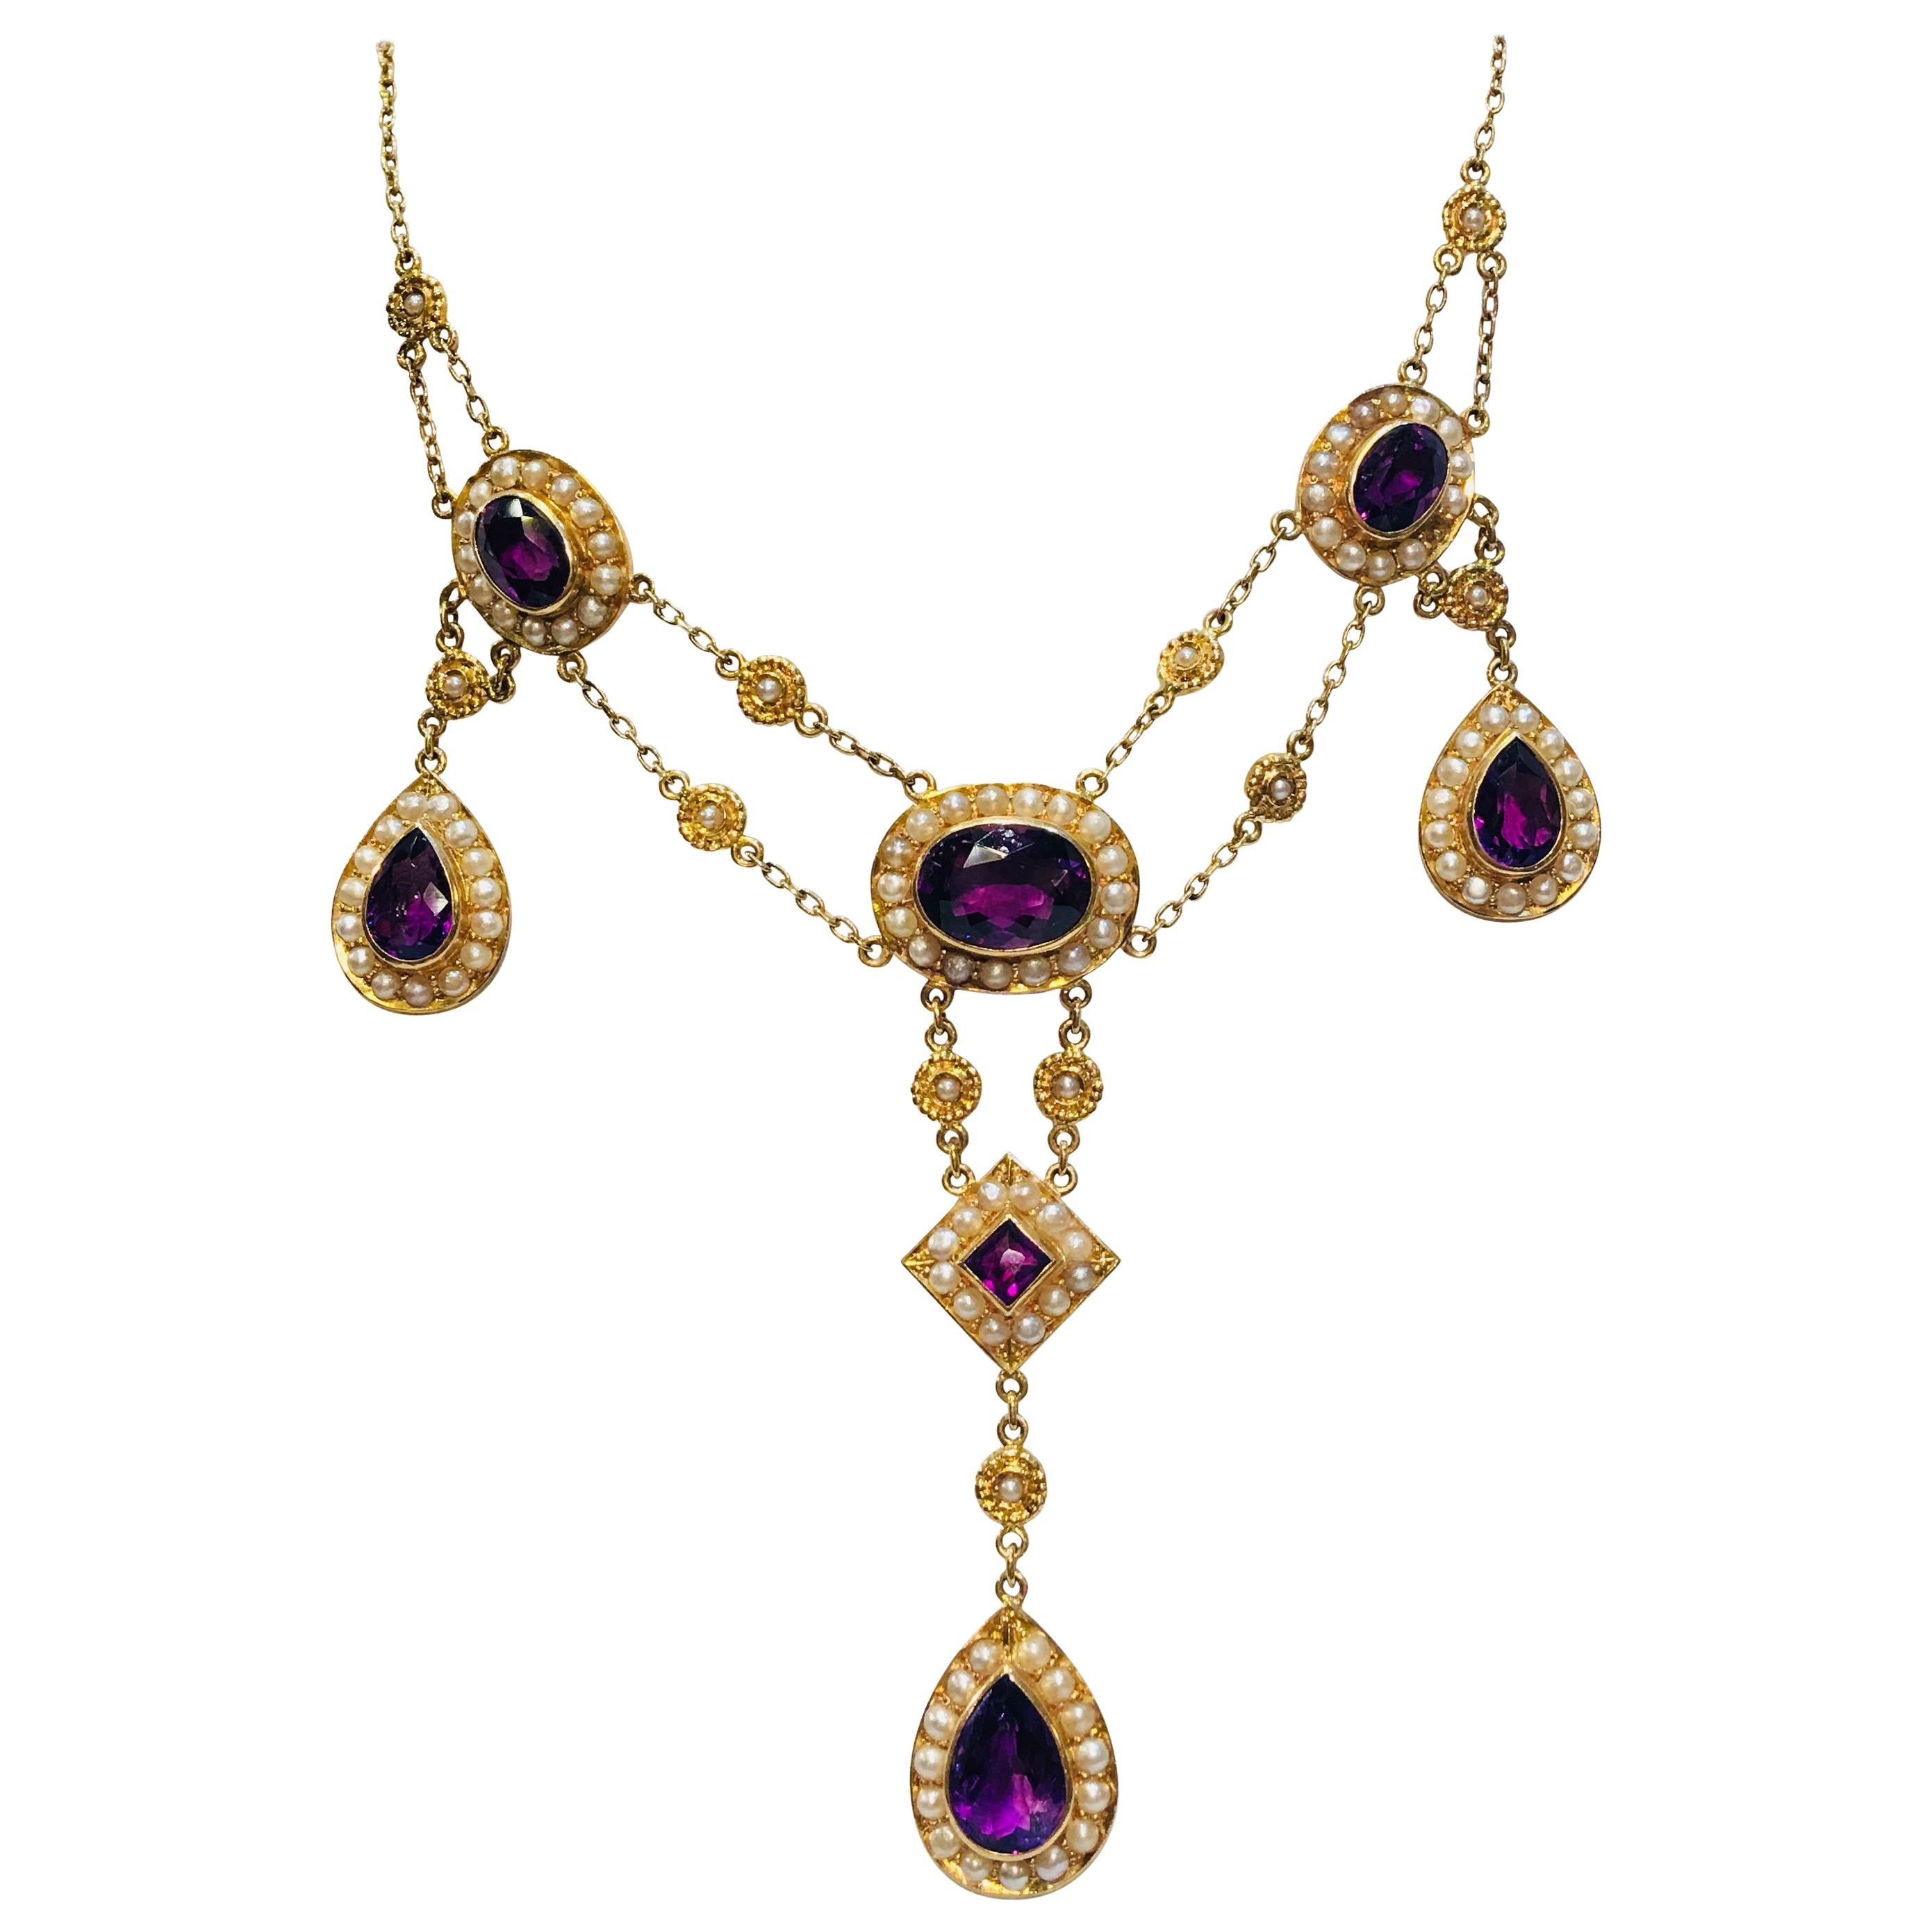 Stunning Vintage Siberian Amethyst Pearl Yellow Gold Chandelier Necklace